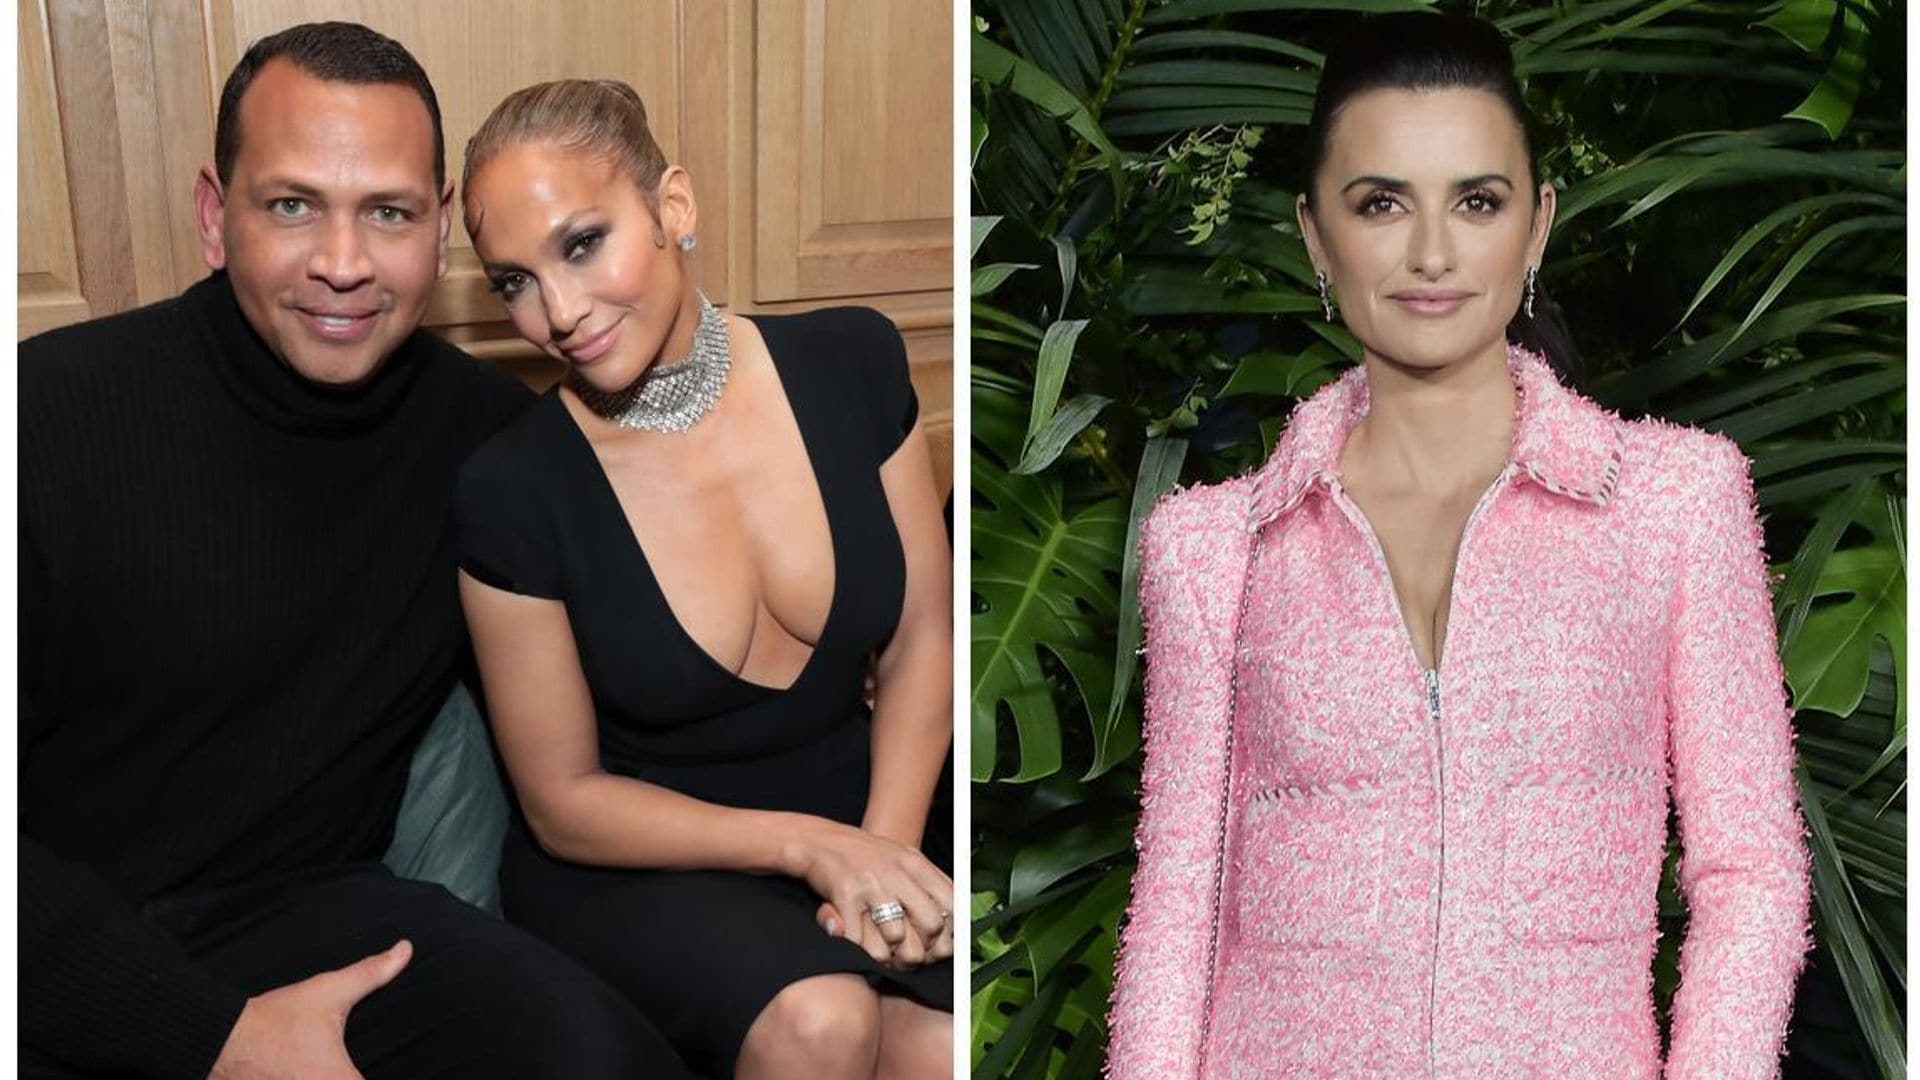 Oscars 2020: Step inside all the lavish pre-parties with J-Rod and more